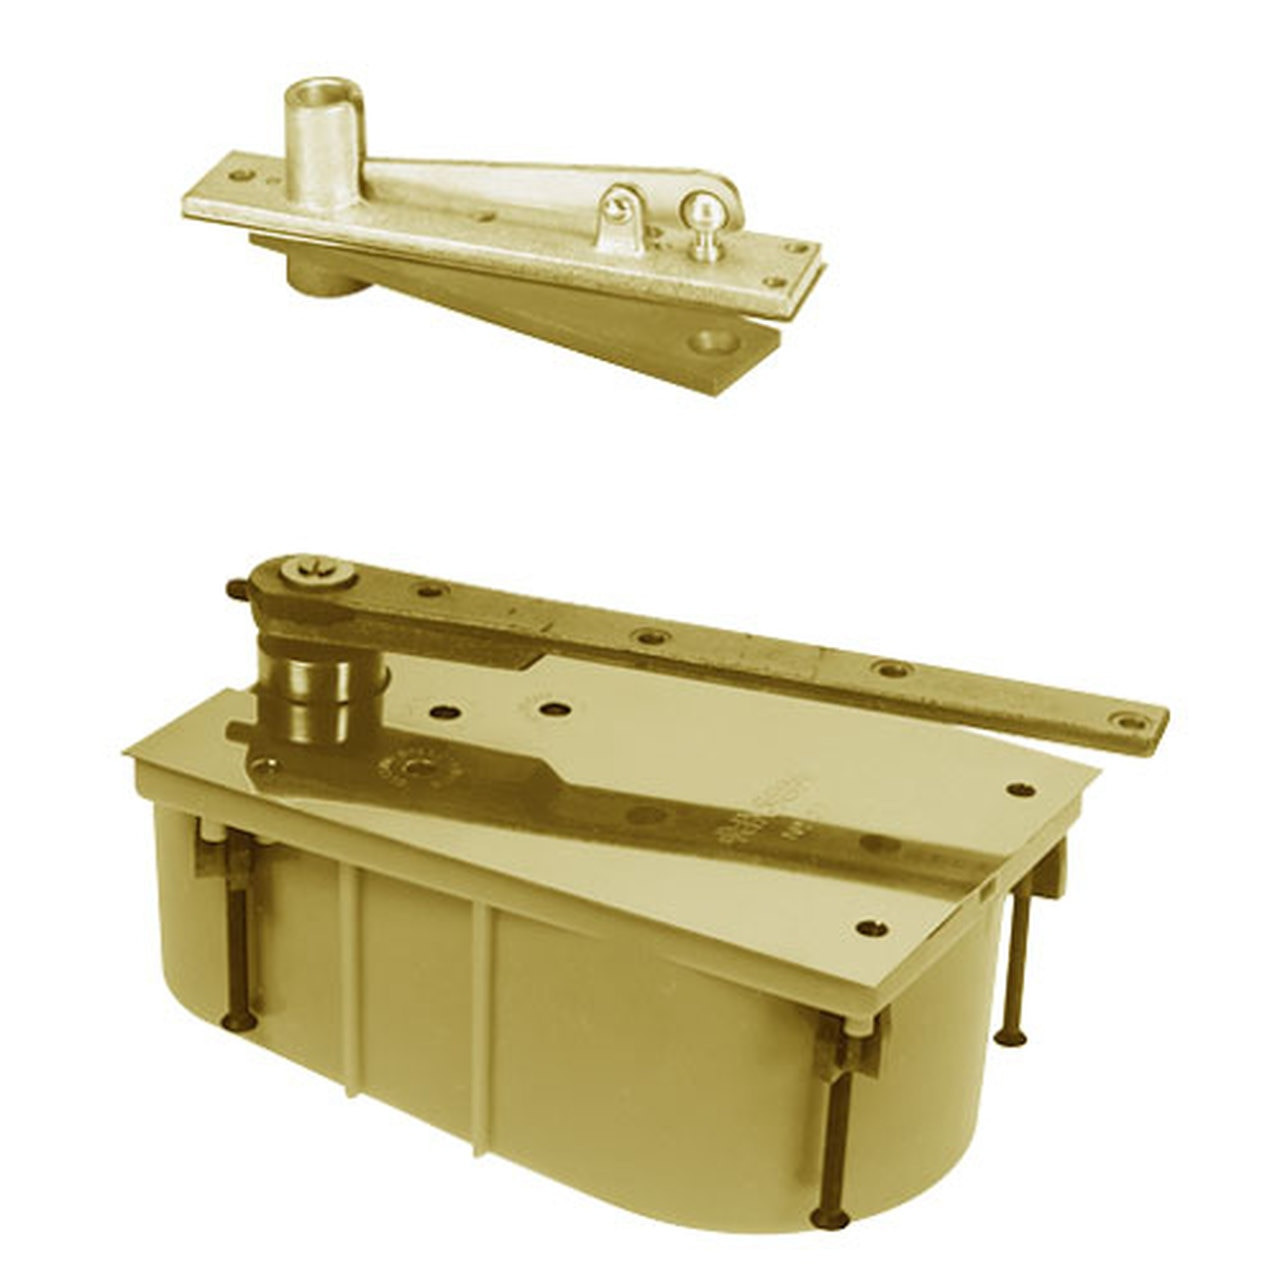 28-105N-554-LFP-LCC-RH-606 Rixson 28 Series Heavy Duty Single Acting Center Hung Floor Closer with Concealed Arm in Satin Brass Finish